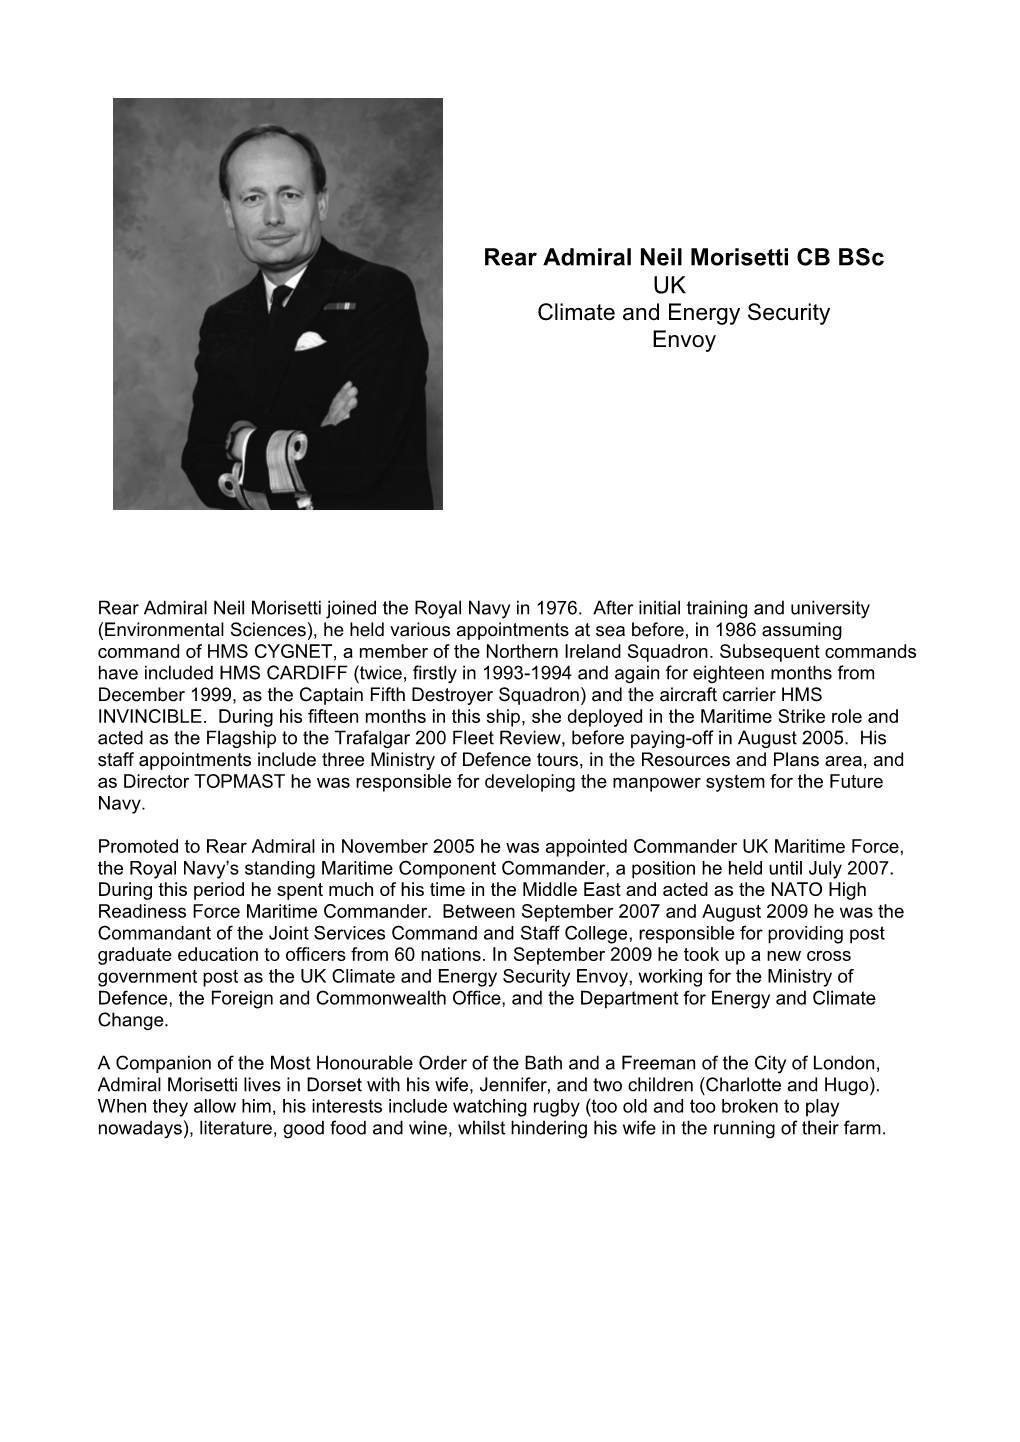 Rear Admiral Neil Morisetti Joined the Royal Navy in 1976